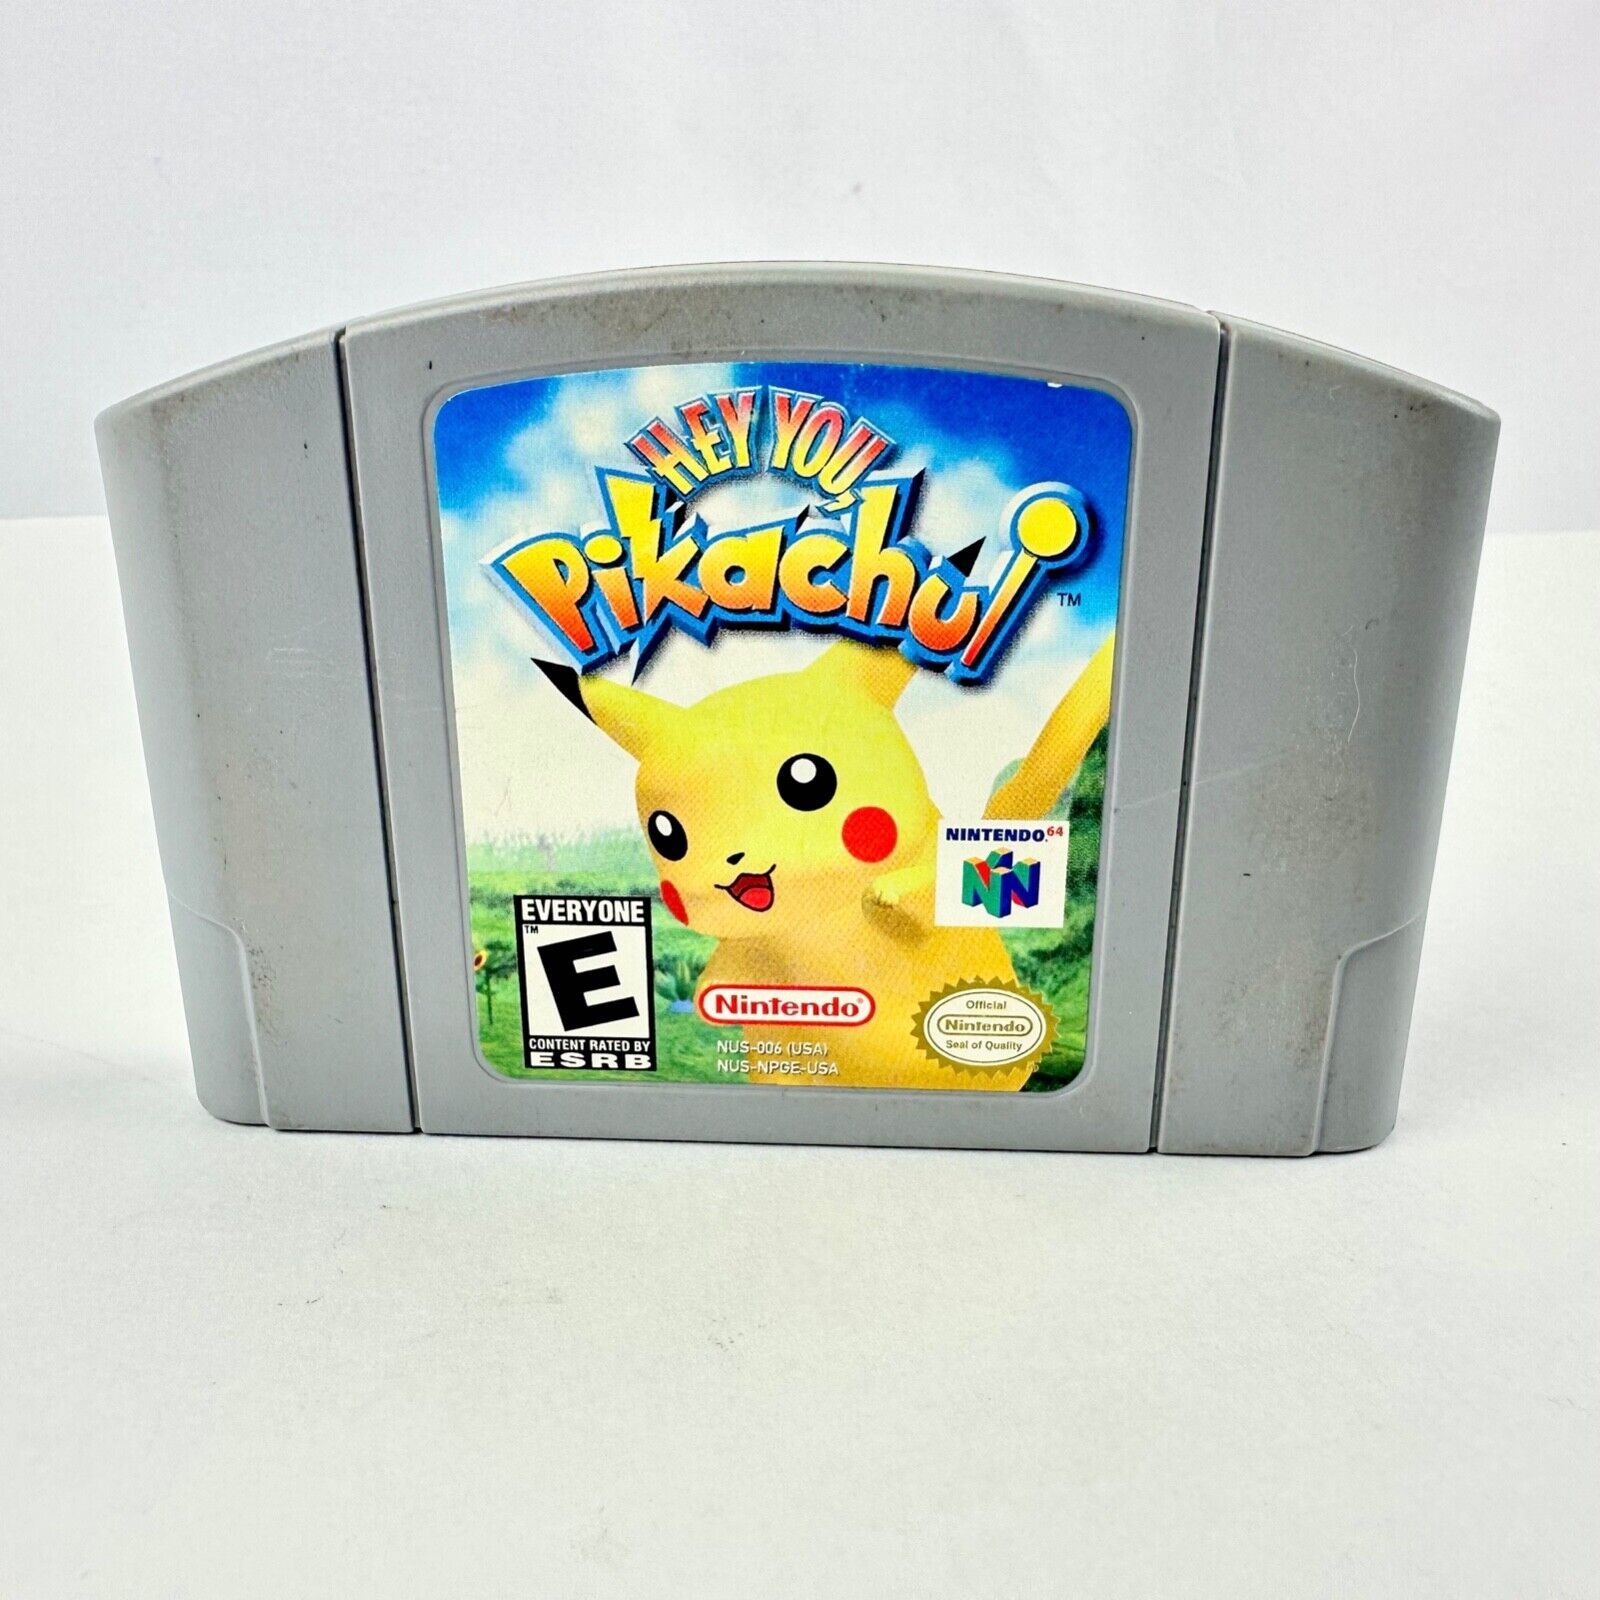 Primary image for Vintage 2000 Hey You, Pikachu! Nintendo 64 Game Cartridge Only - AUTHENTIC